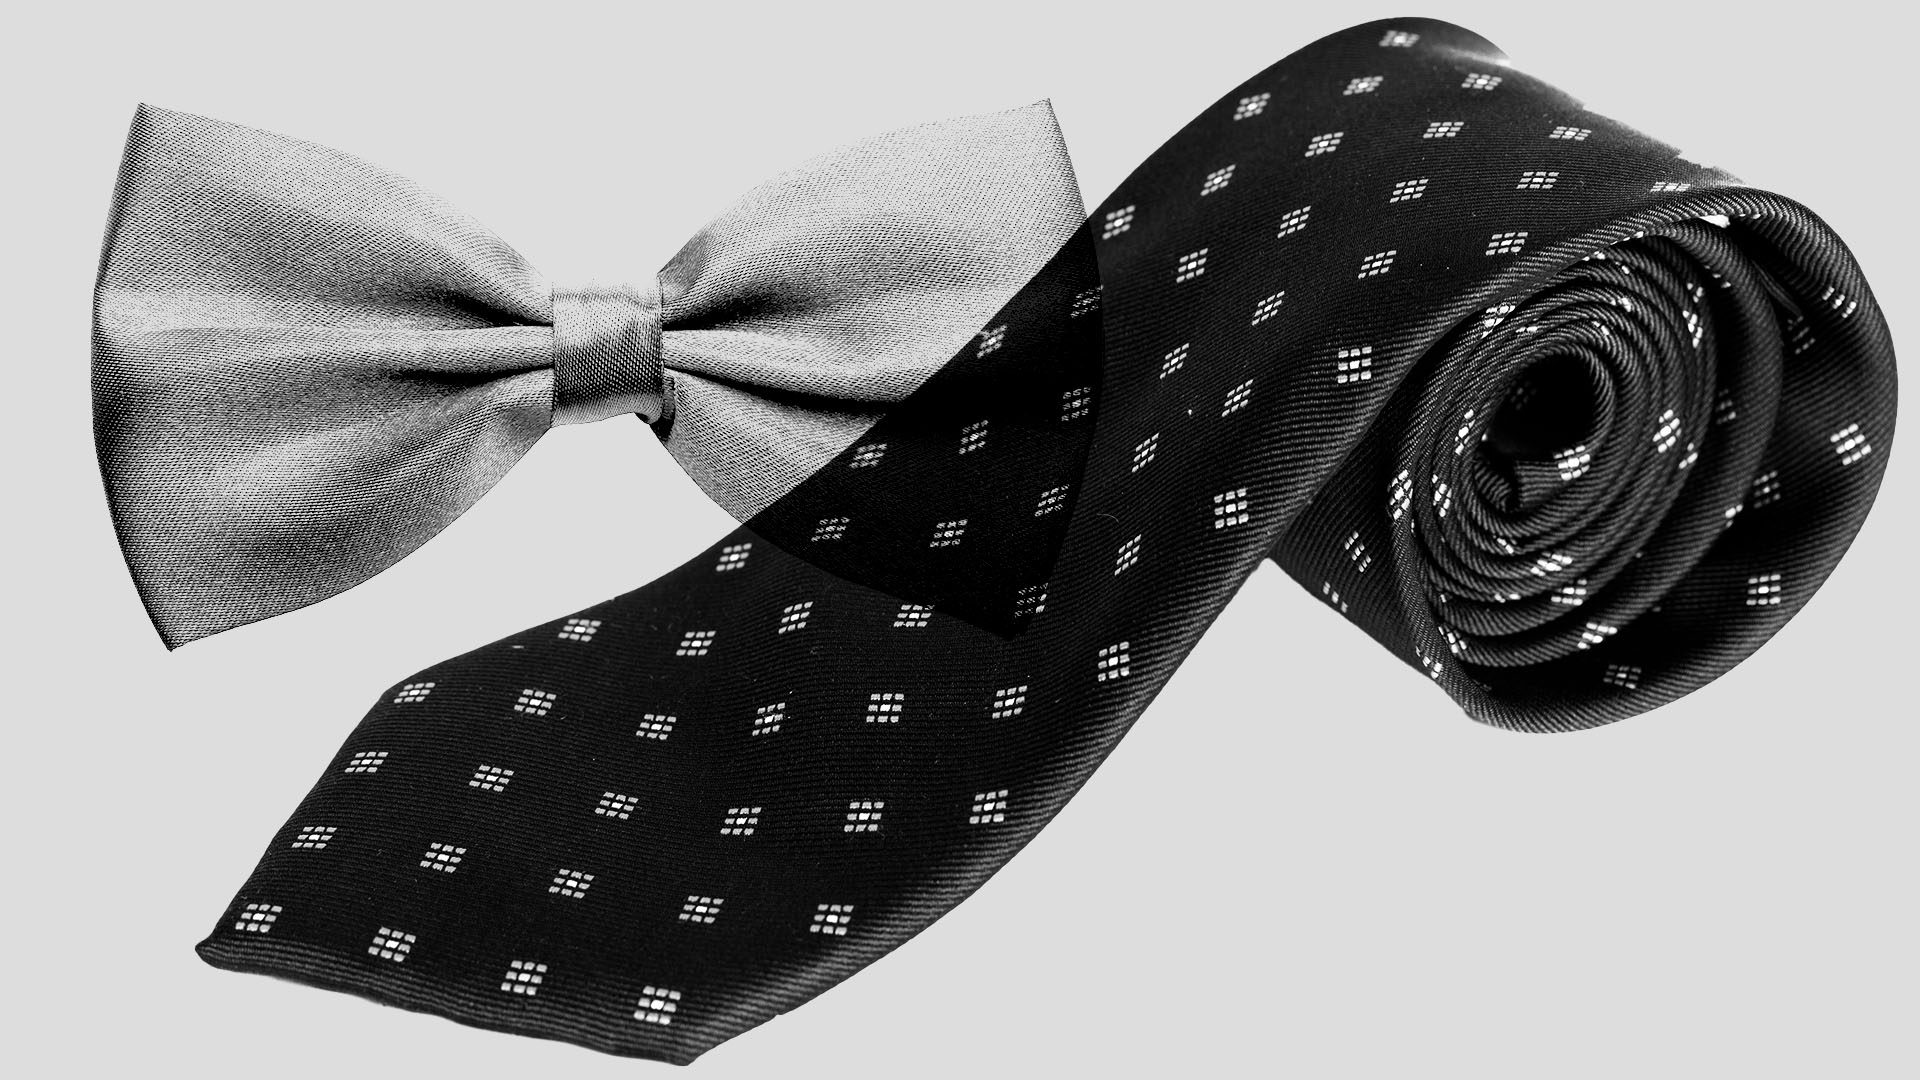 White Tie vs. Black Tie: Which Is More Formal? | Dictionary.com